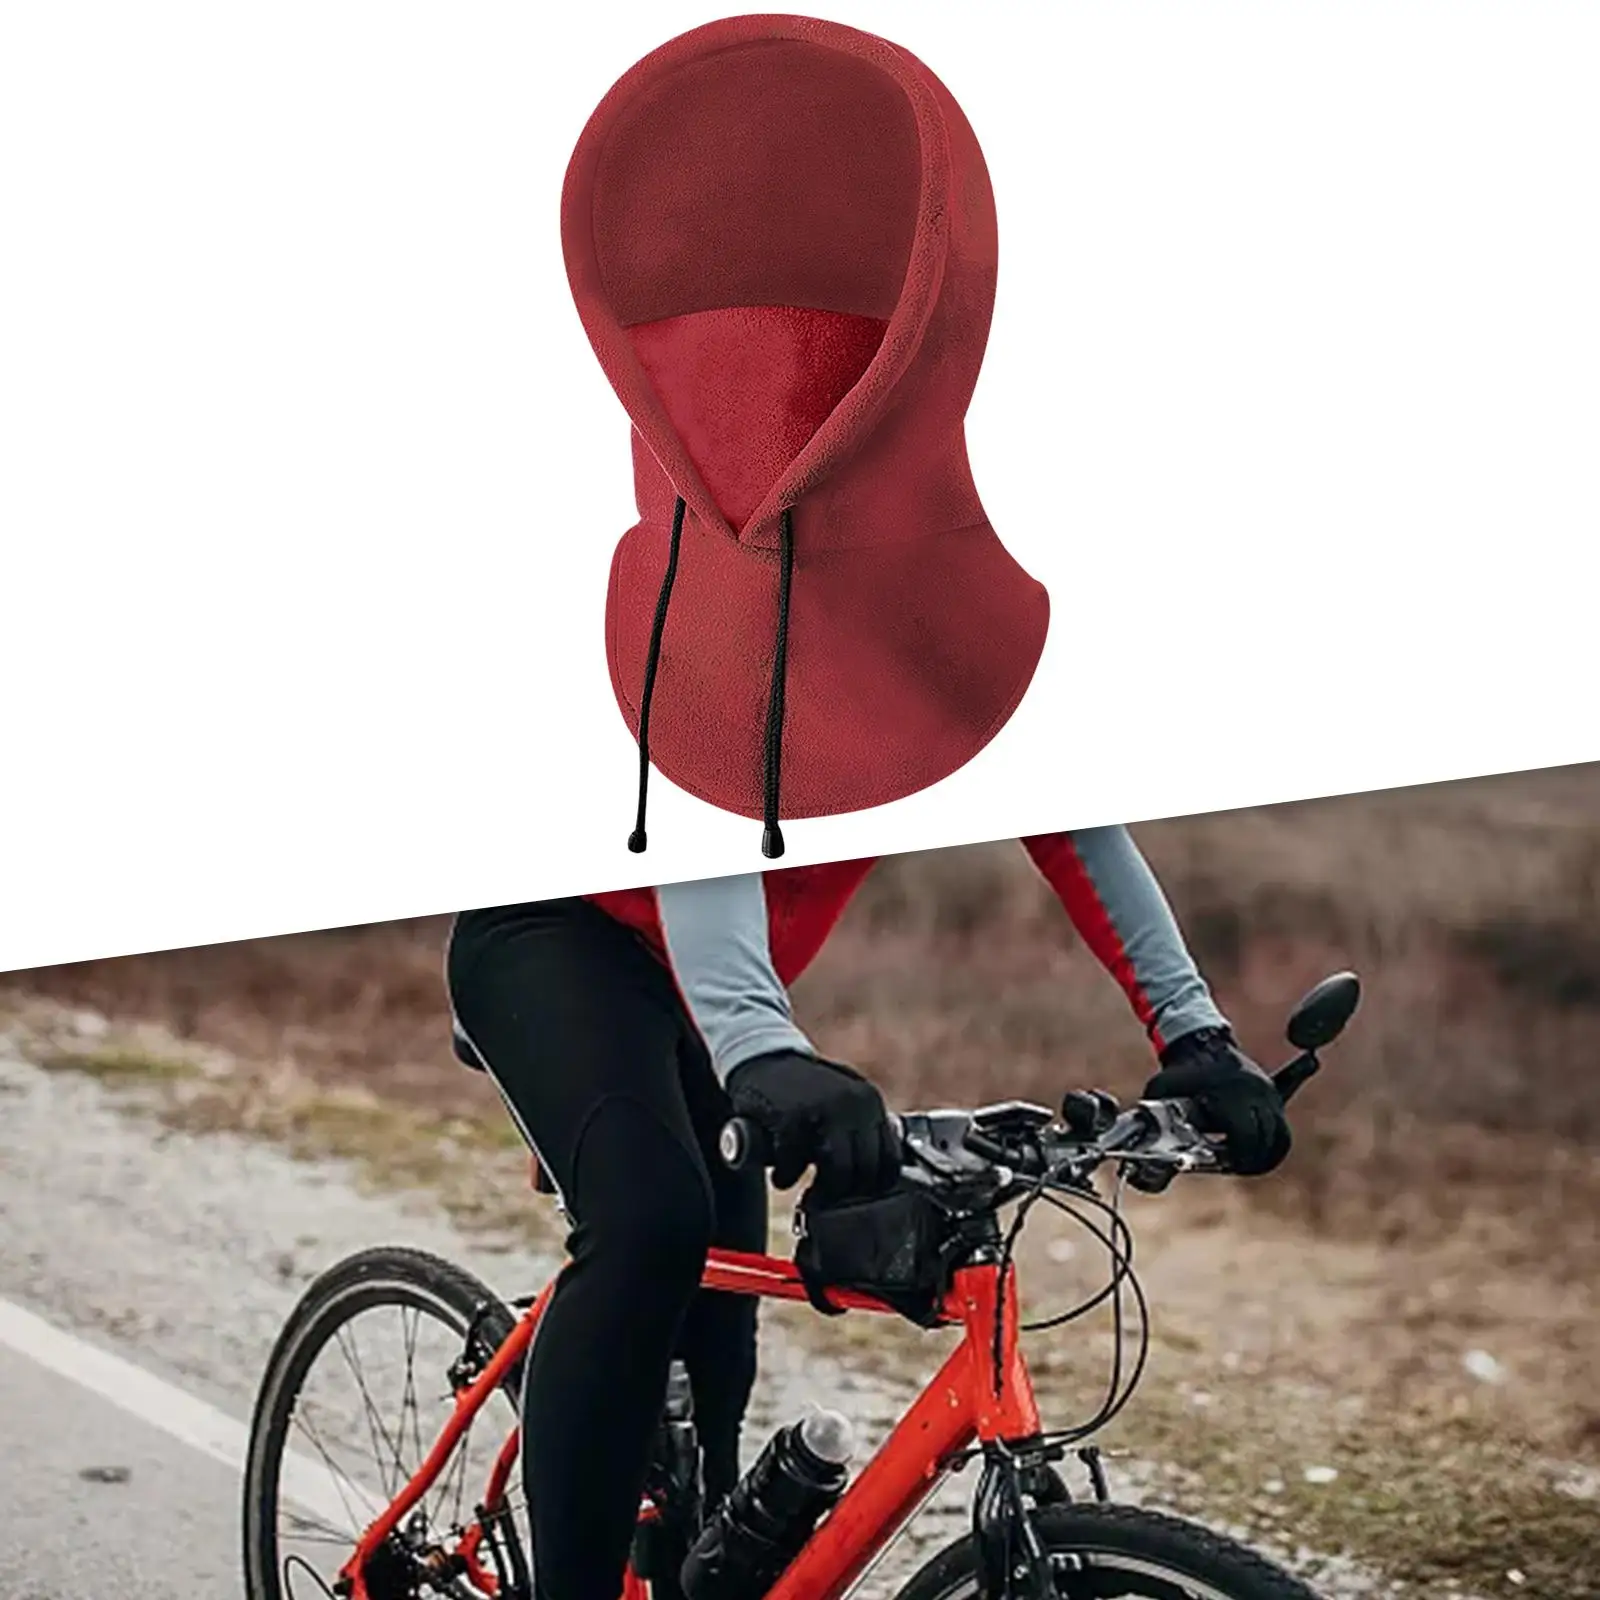 Winter Warm Riding Mask Windproof Full Face Headgear Outdoor Sports Mask Hooded Cycling Scarf Fleece Insulation Elastic Mask